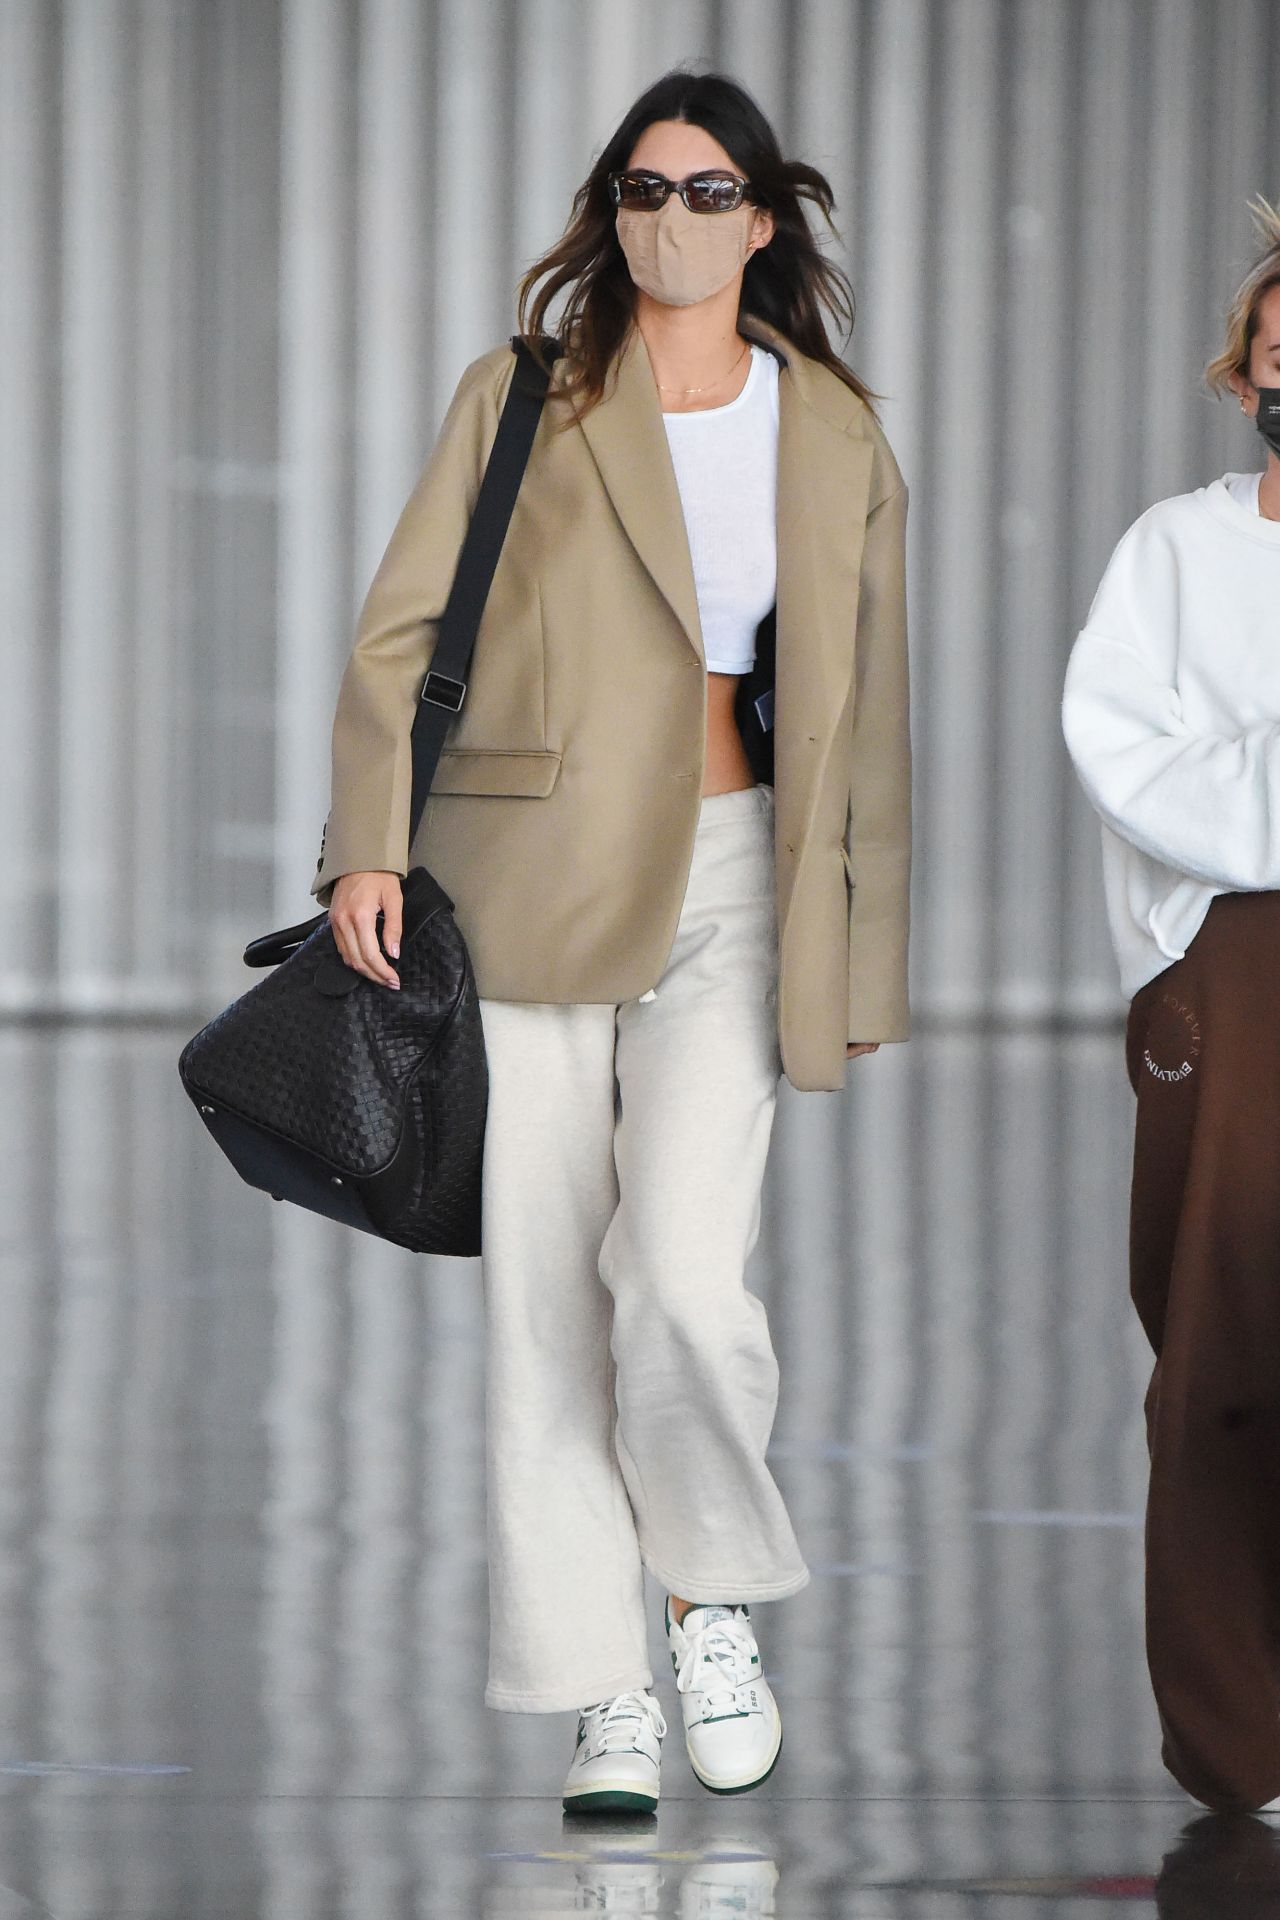 Kendall Jenner at JFK Airport March 25, 2011 – Star Style